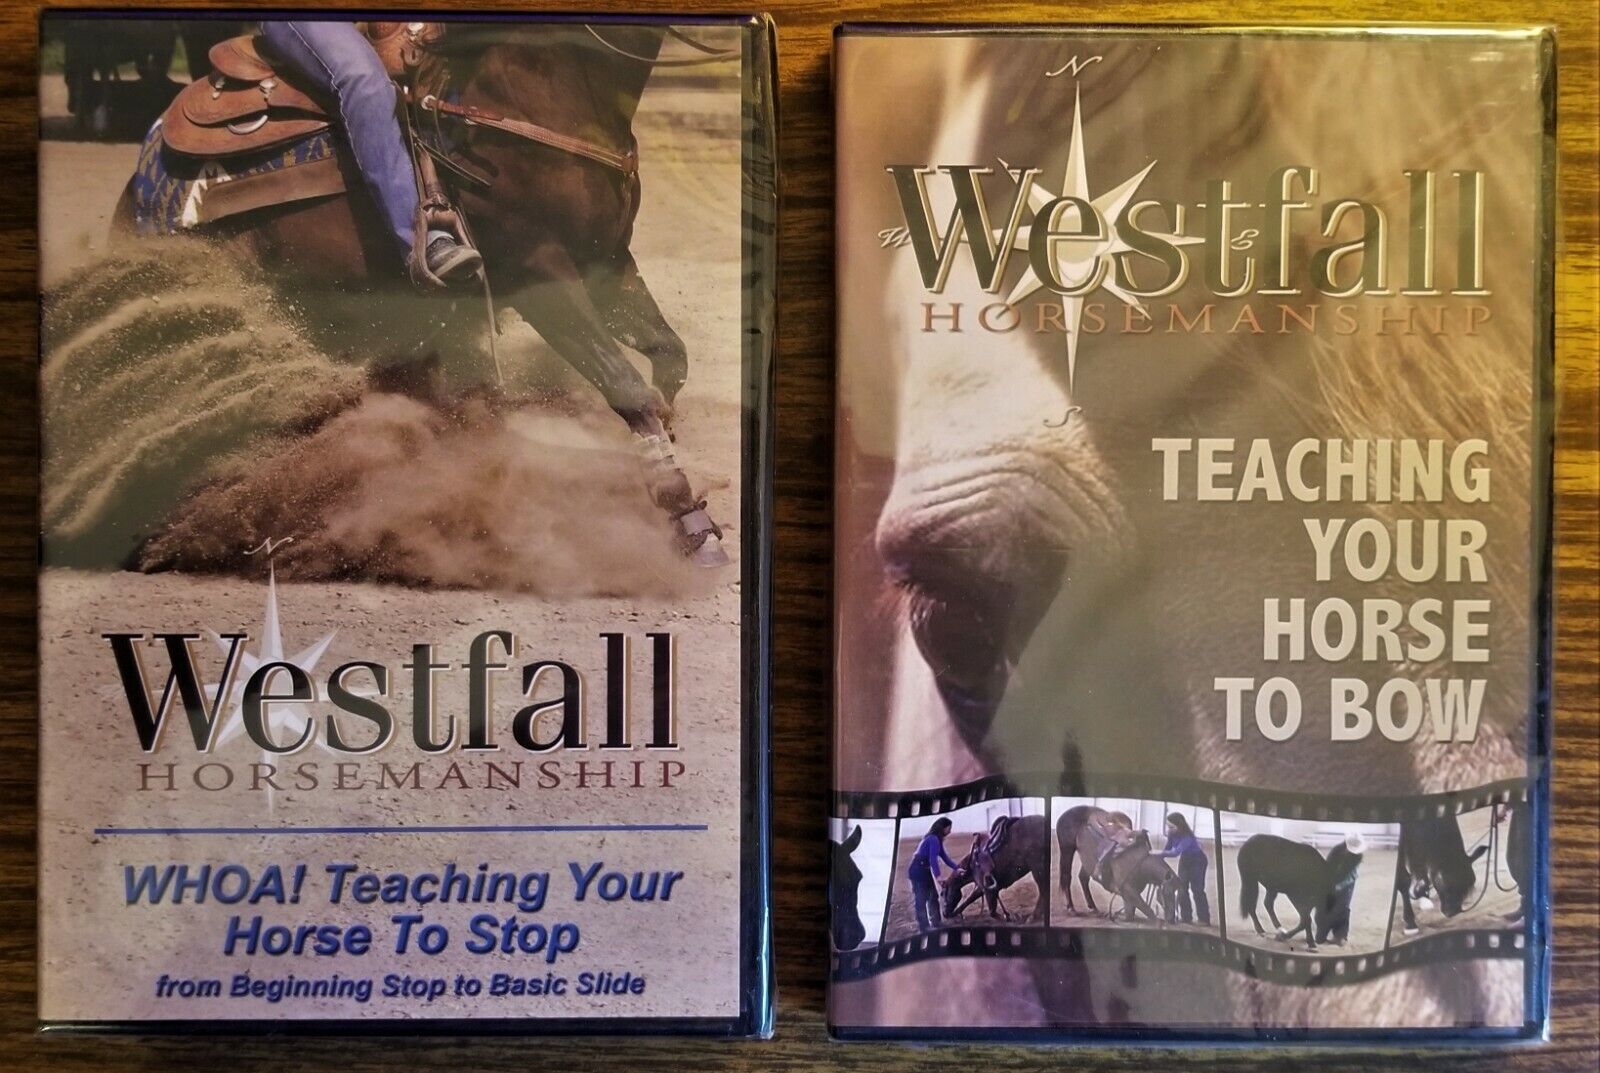 Stacy Westfall Lot of 2 DVDs Teach Your Horse to Bow, Whoa! Teaching Stop Westfall Horsemanship Does Not Apply